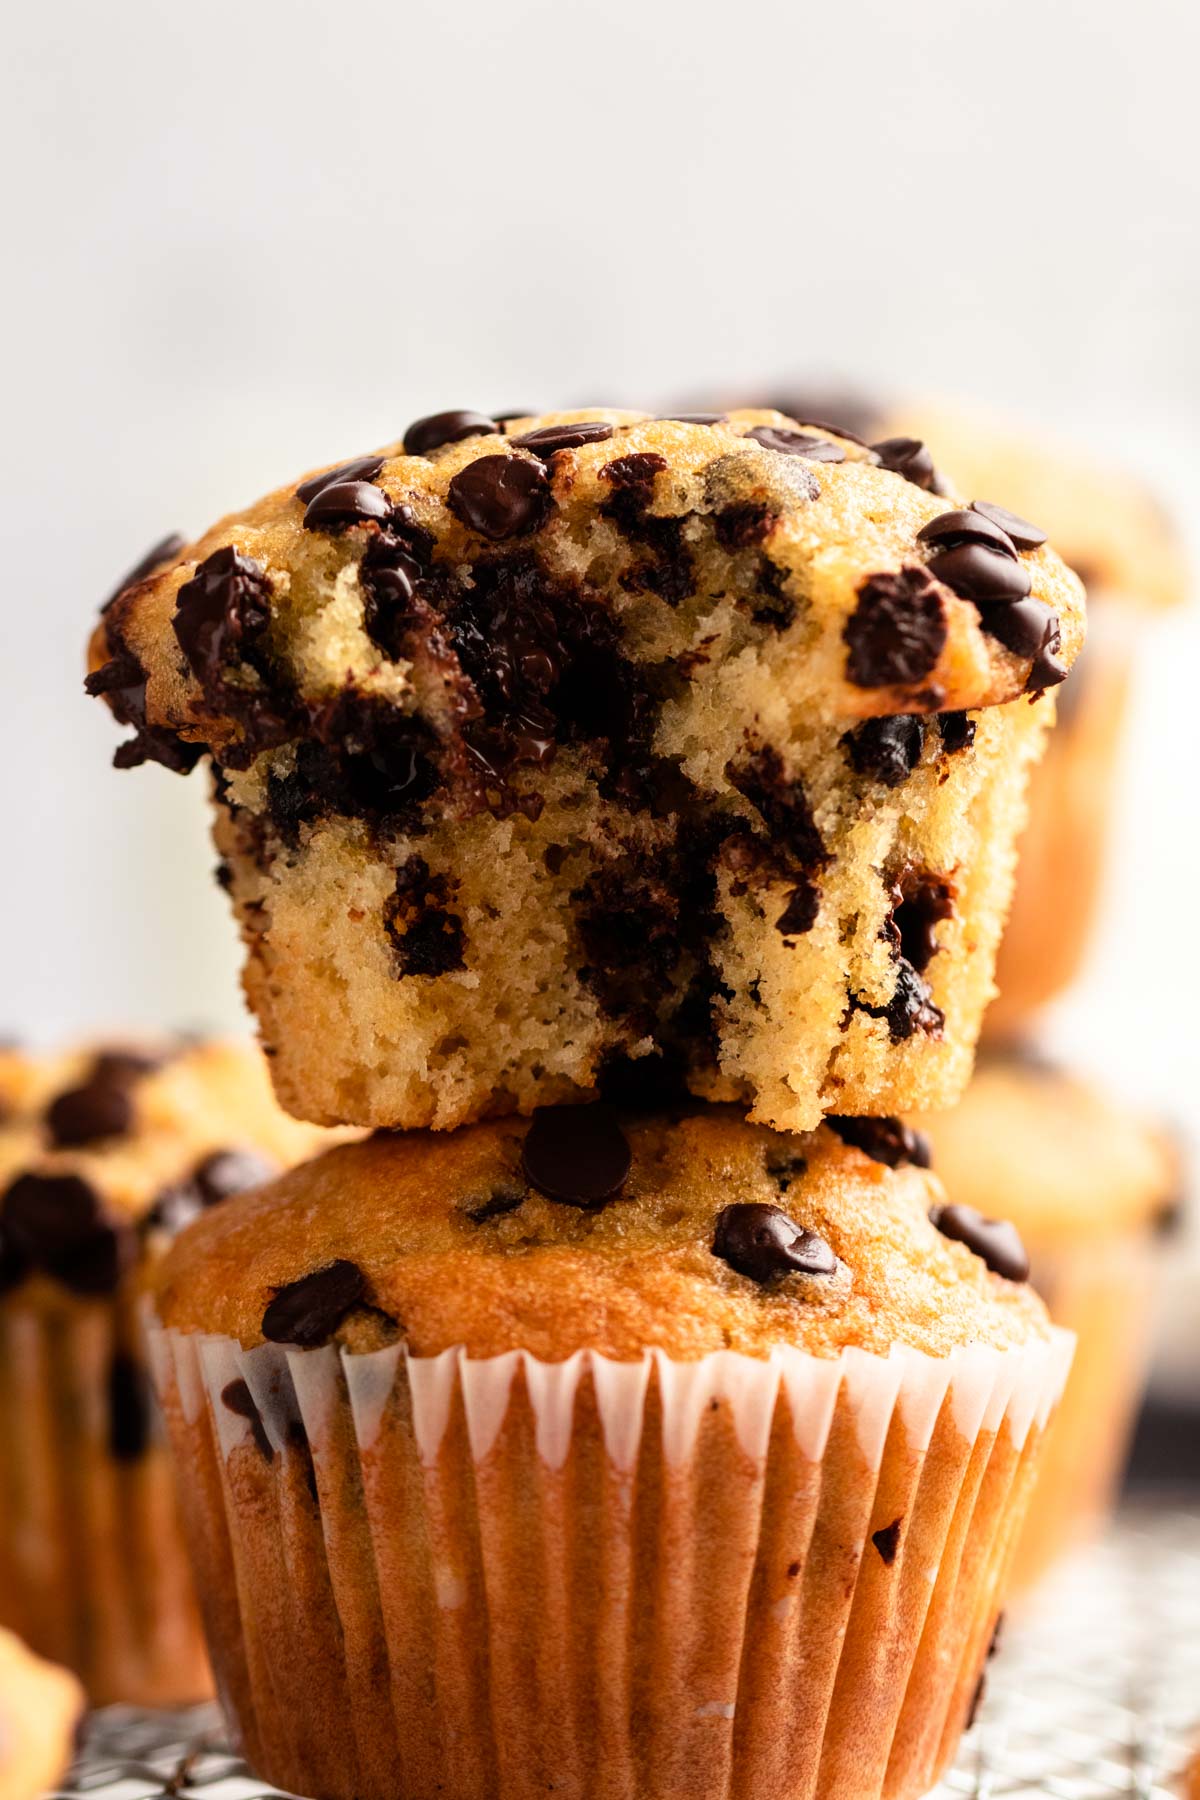 Stack of two muffins with the top one missing a bite.